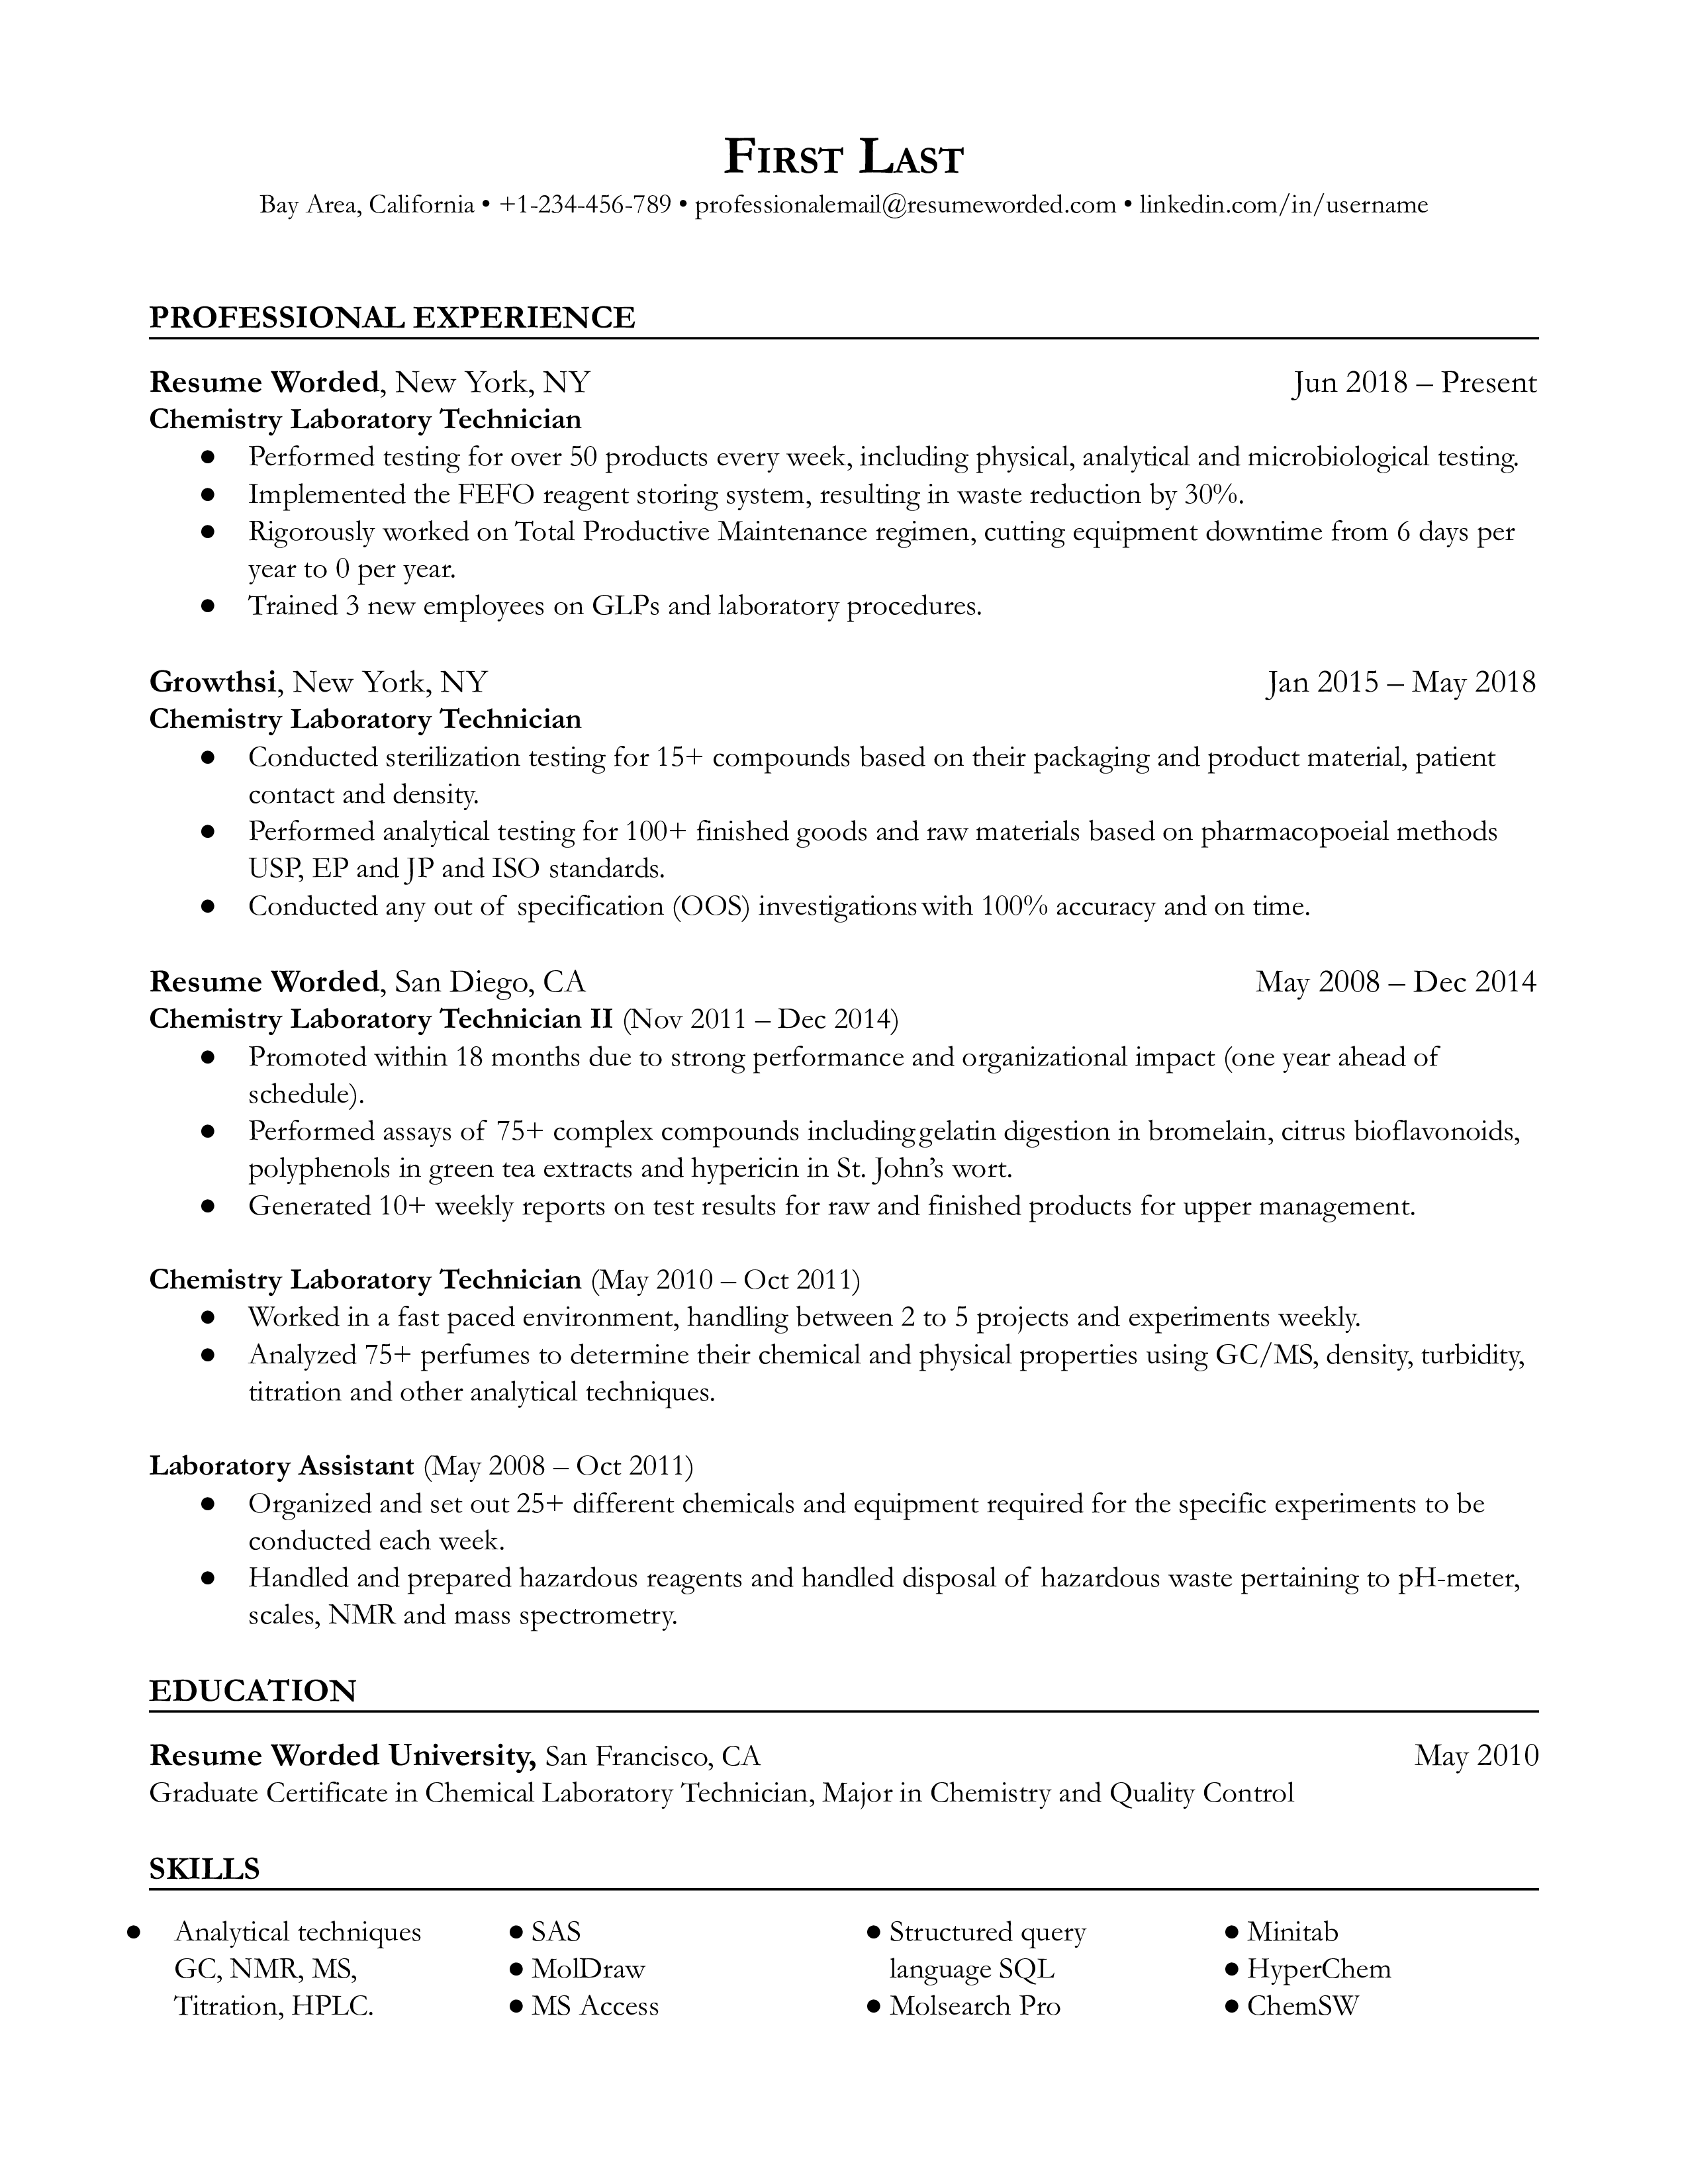 A resume for a chemistry lab technician with a graduate degree in chemistry and prior roles as a laboratory assistant.